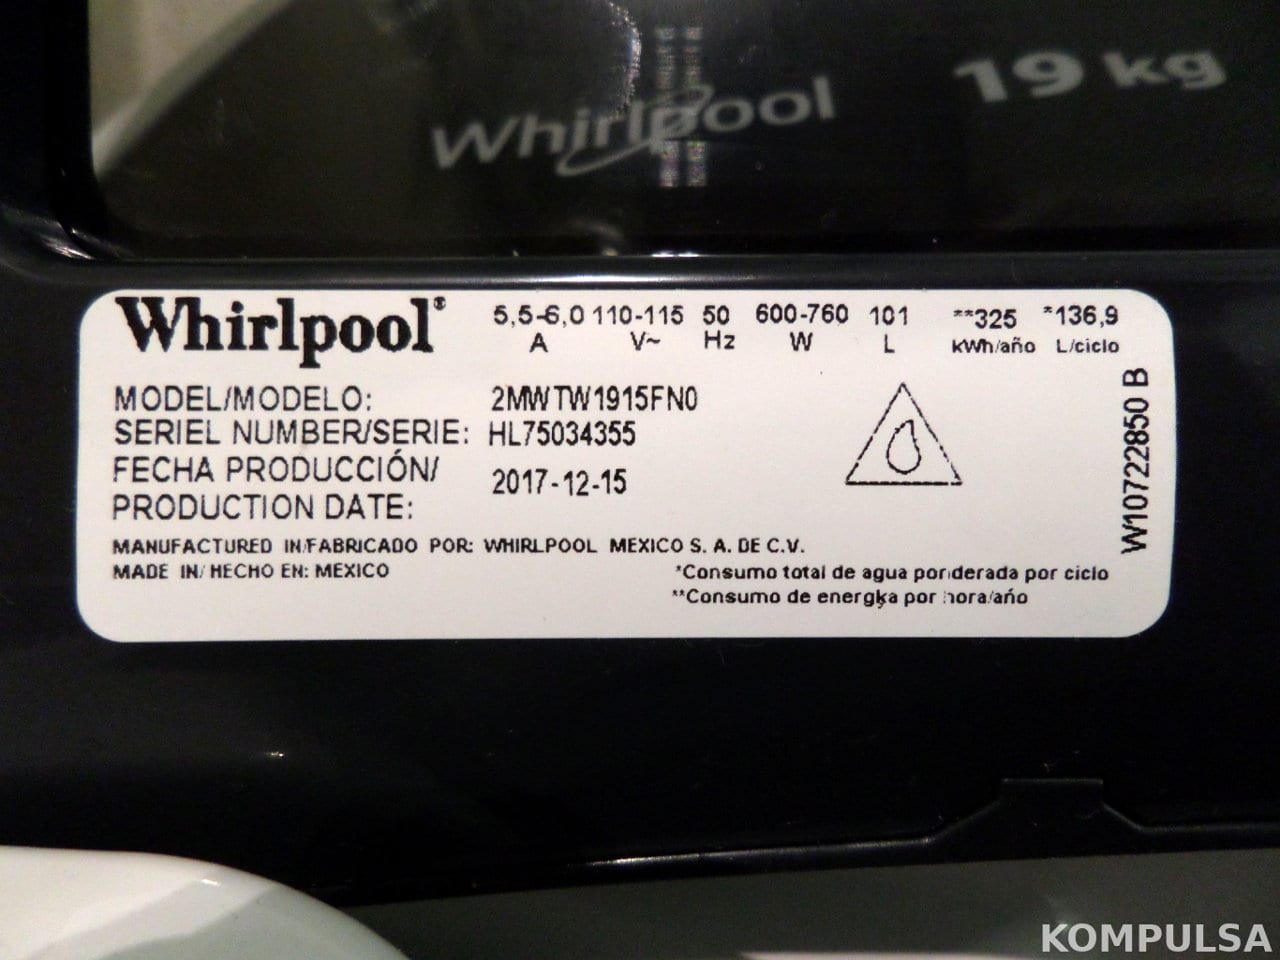 Washer label with electrical ratings